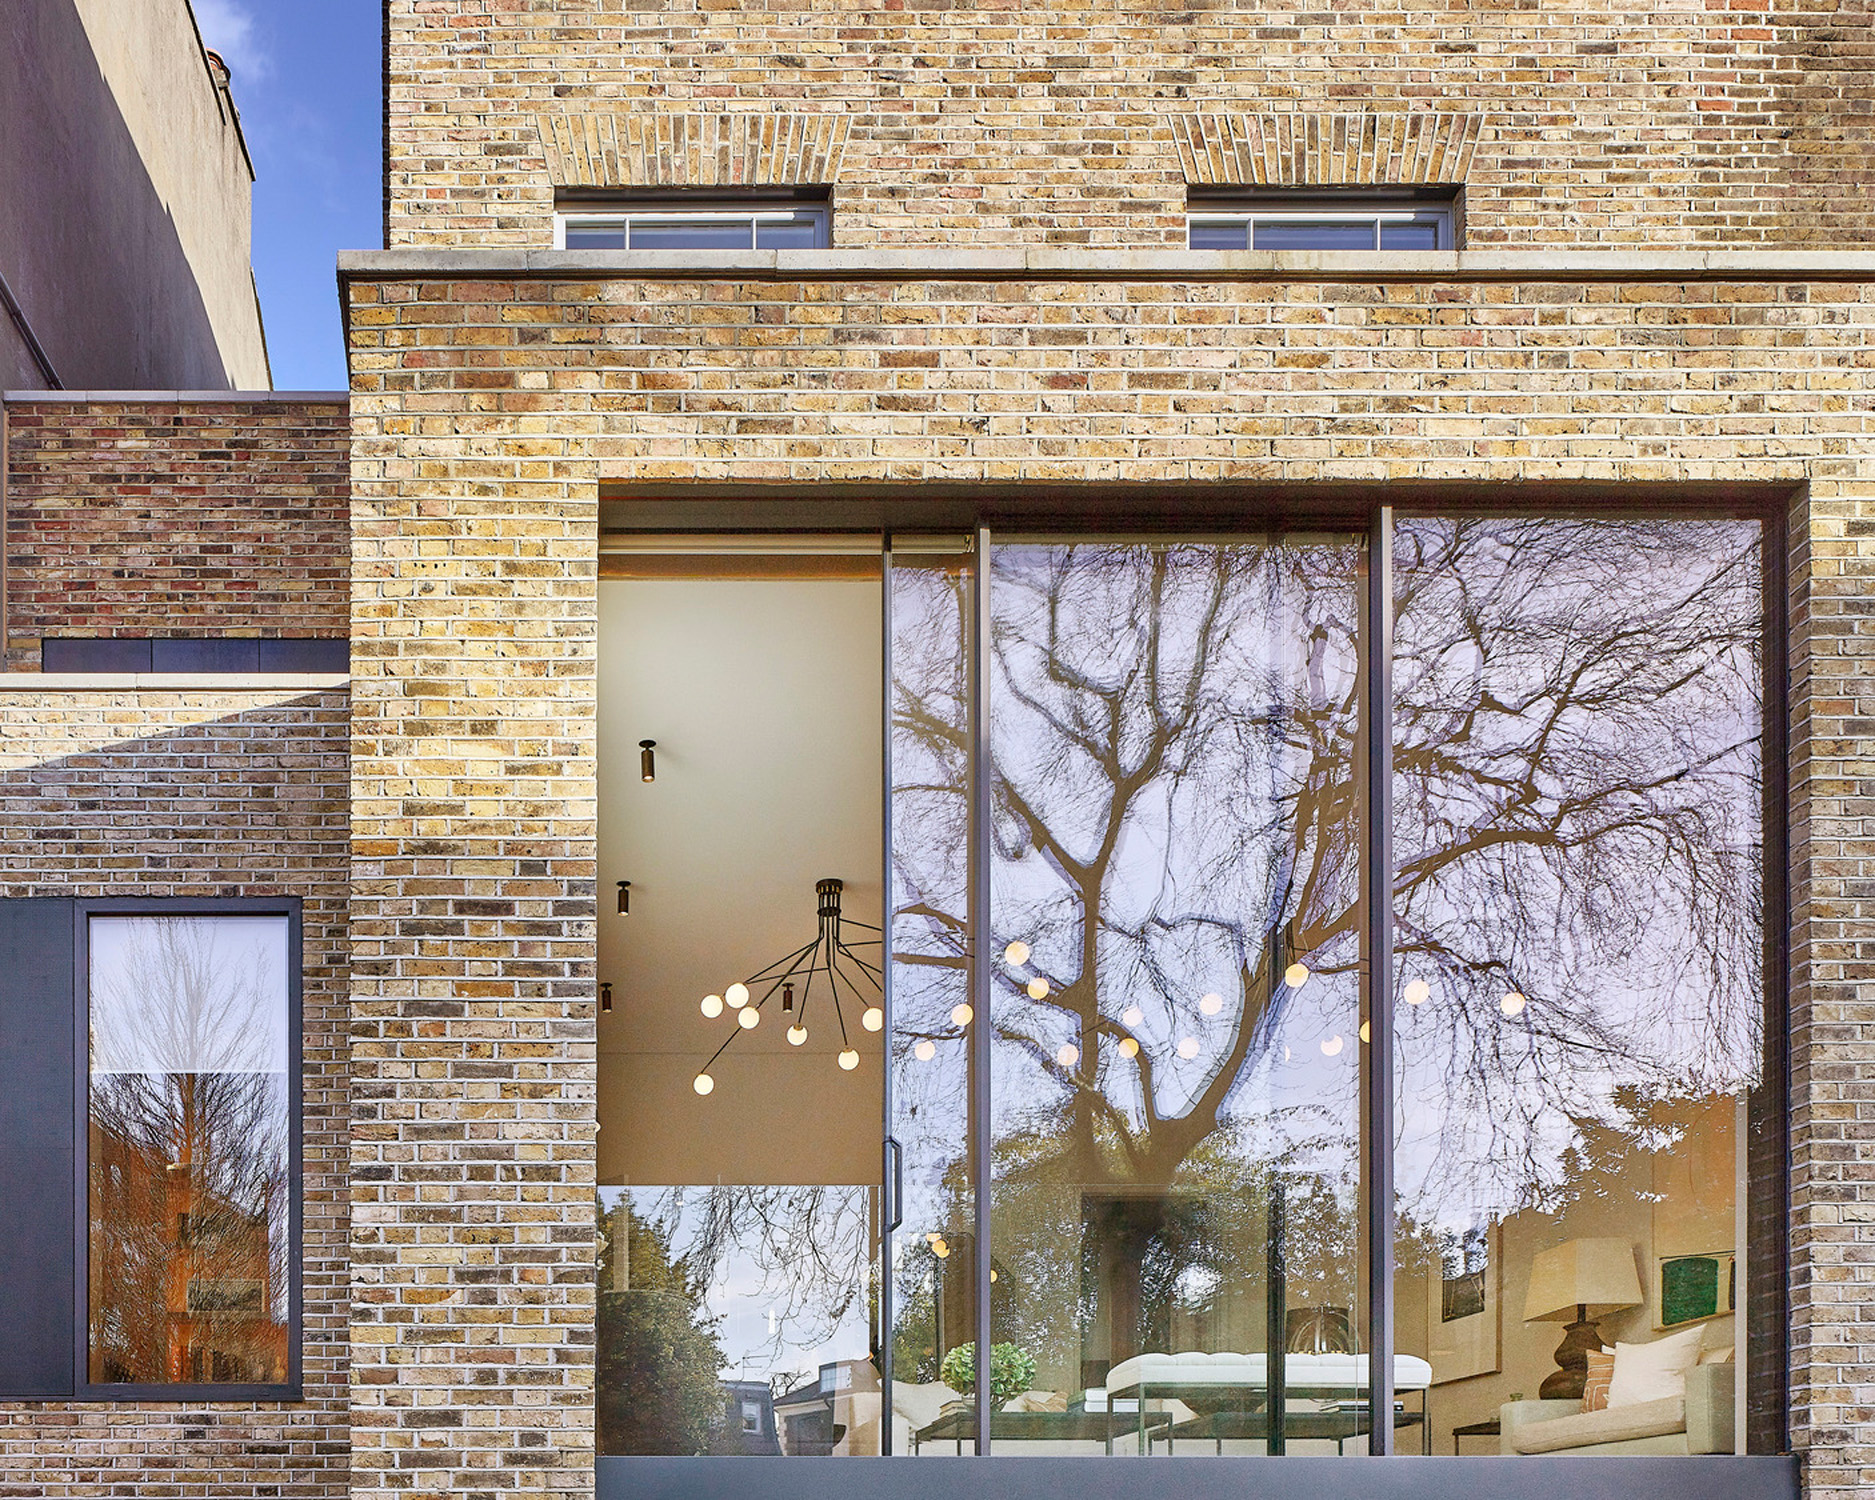 French doors by Pitman Tozer - contemporary design studio in London